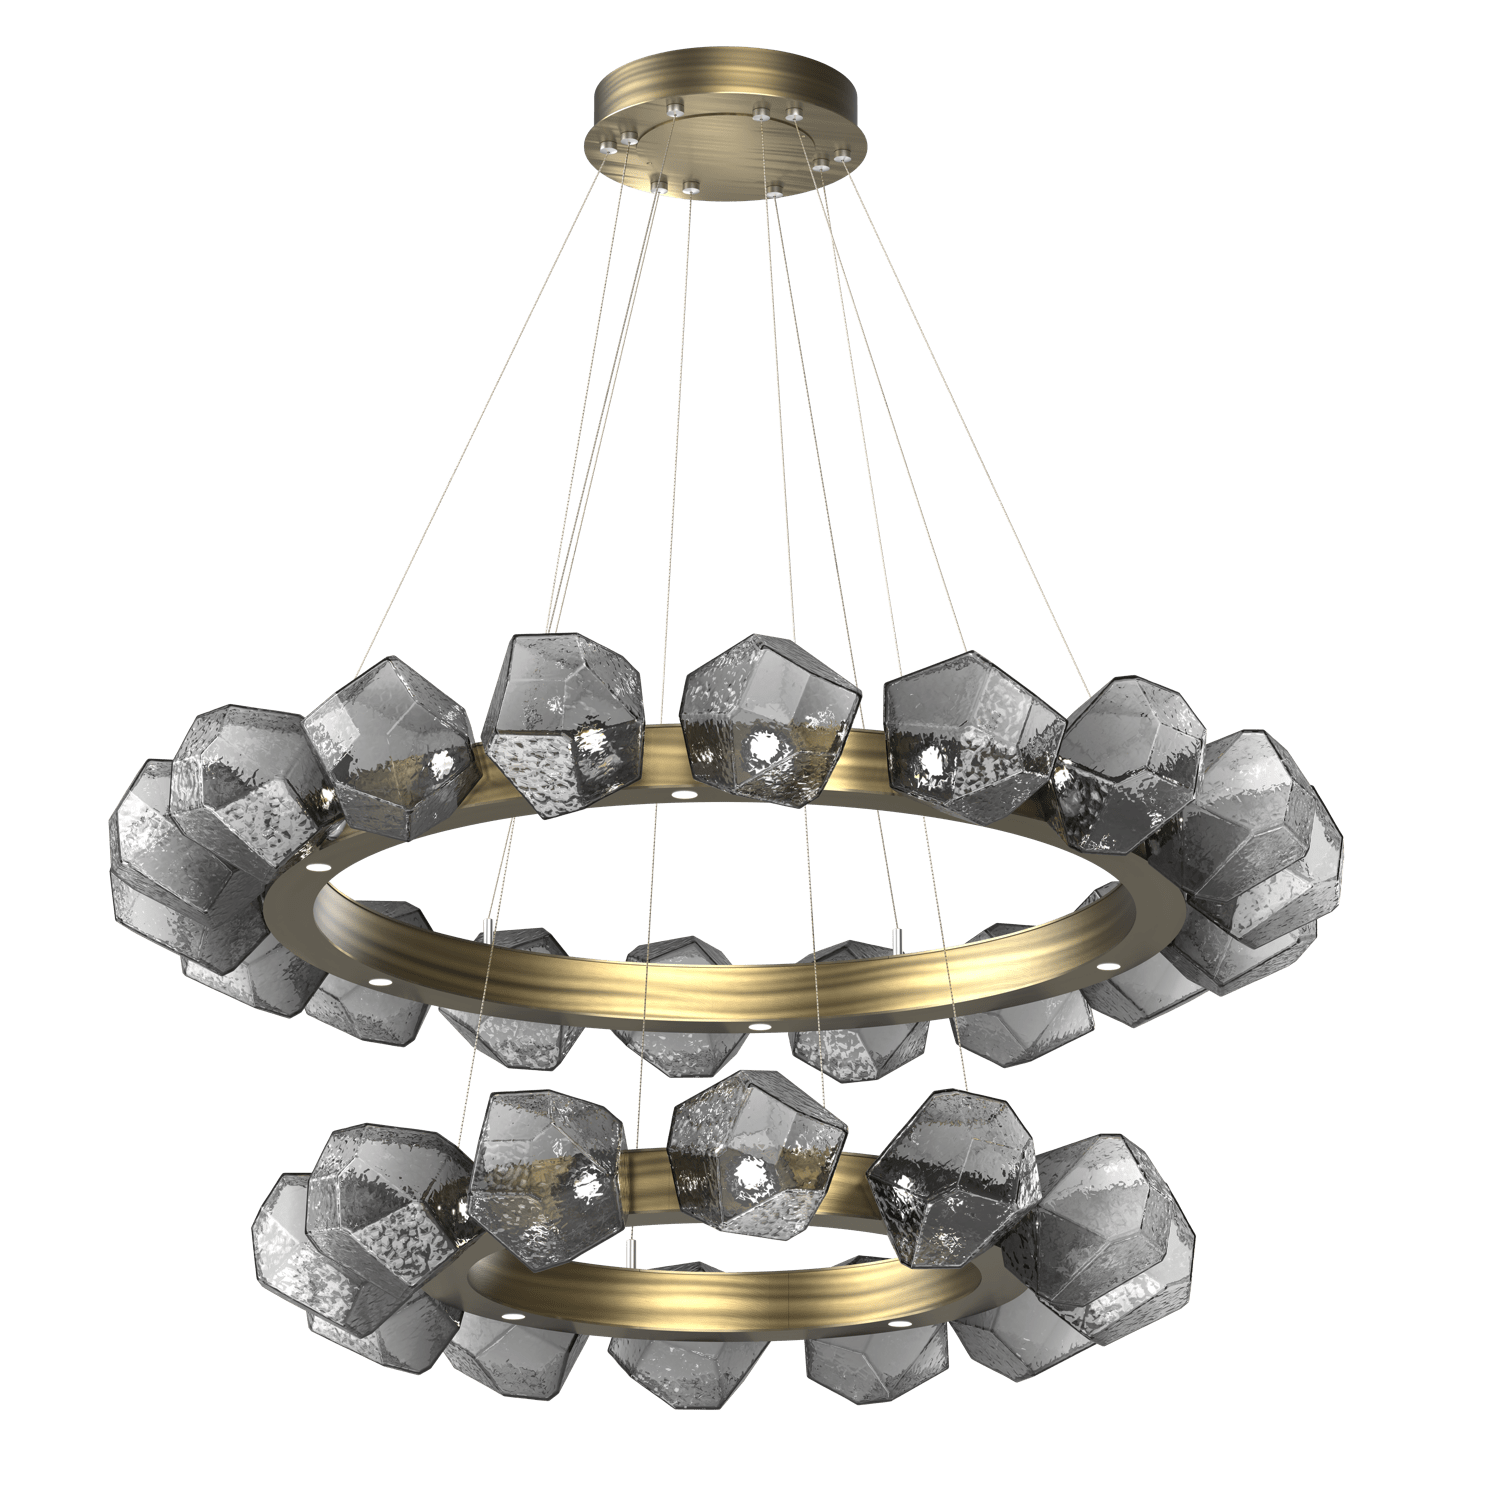 CHB0039-2T-HB-S-Hammerton-Studio-Gem-48-inch-two-tier-radial-ring-chandelier-with-heritage-brass-finish-and-smoke-blown-glass-shades-and-LED-lamping